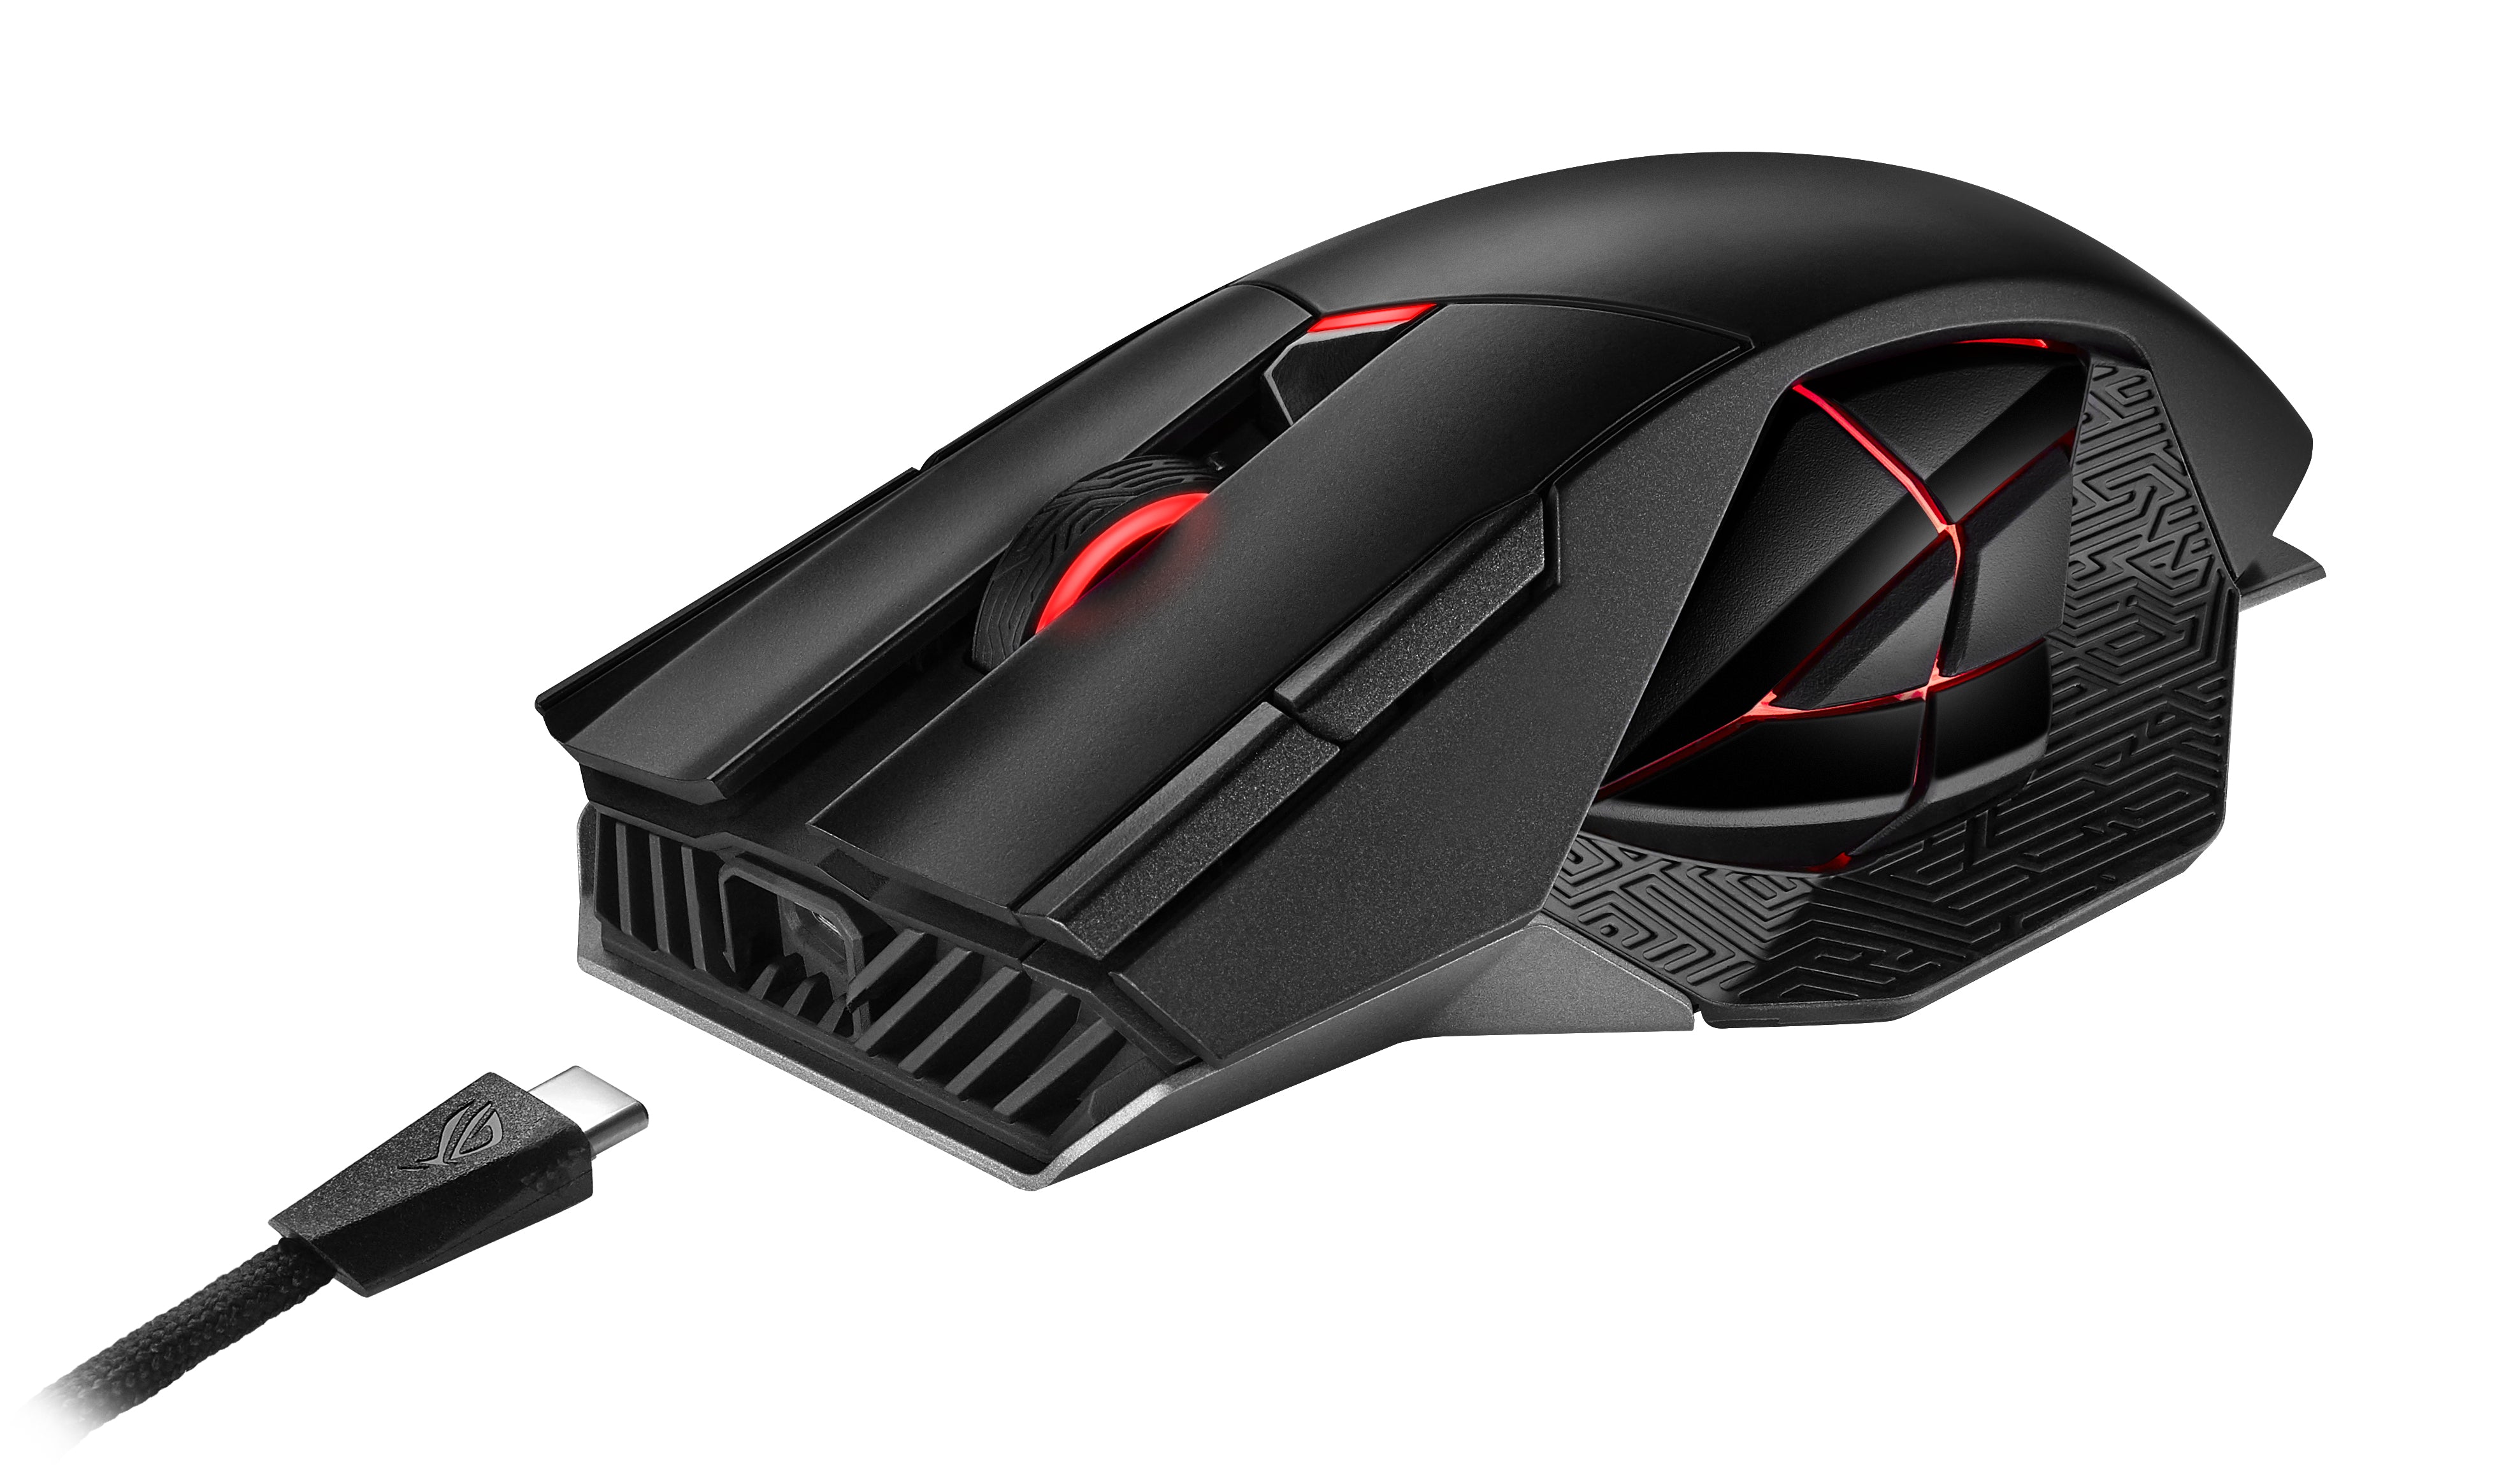 ASUS ROG Spatha X (P707) Wireless Gaming Mouse, Ergonomic Design, 12 programmable buttons, 19000 DPI